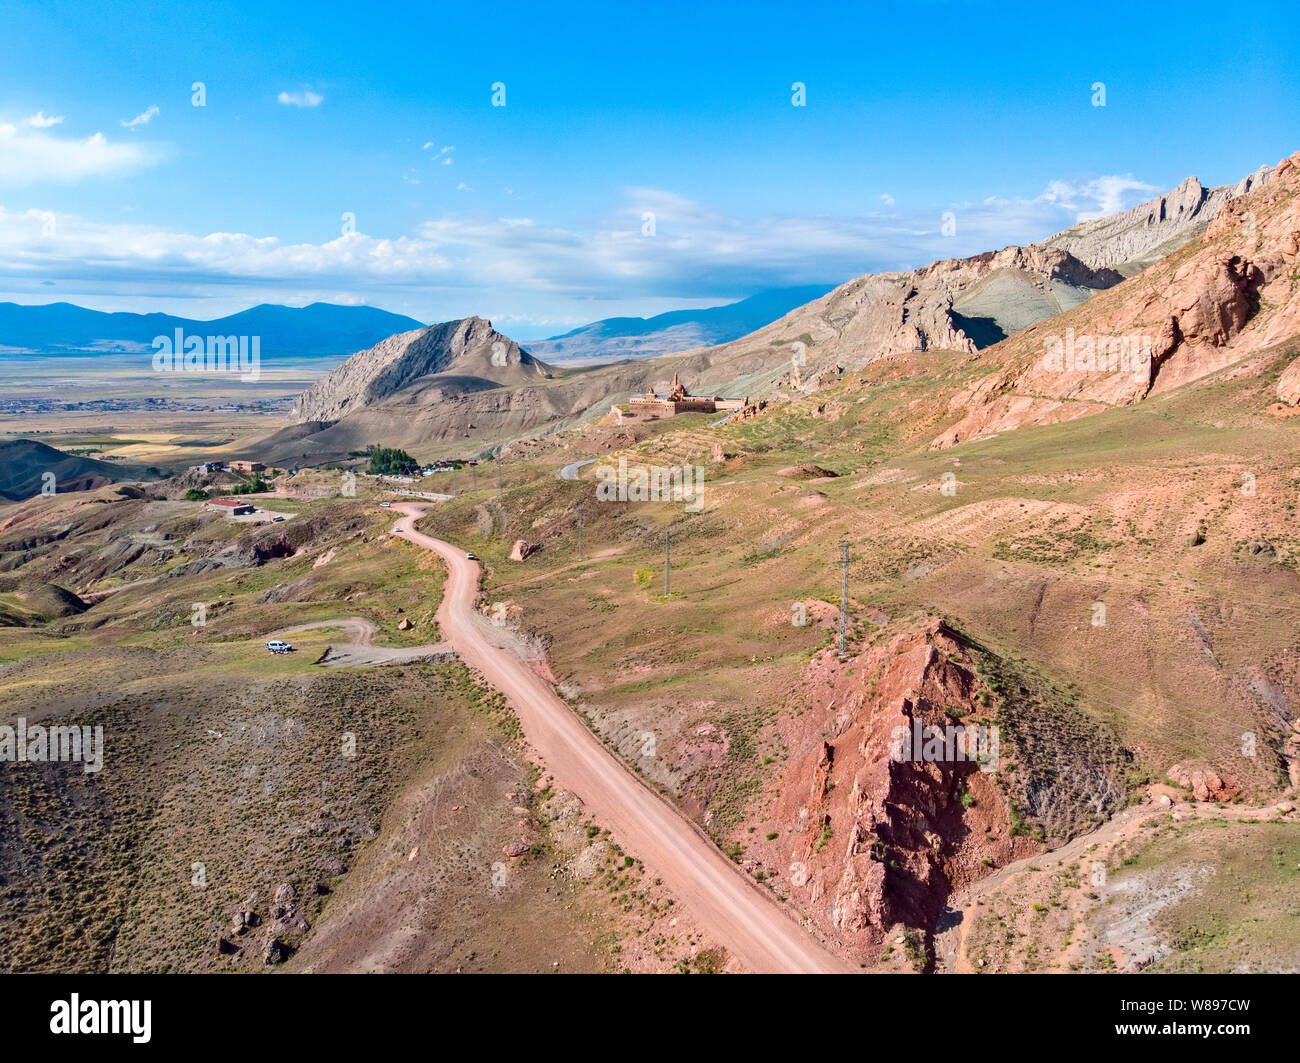 Aerial view of dirt roads on the plateau around Mount Ararat, dirt roads and breathtaking landscapes, winding roads, rocky peaks and hills. Turkey Stock Photo